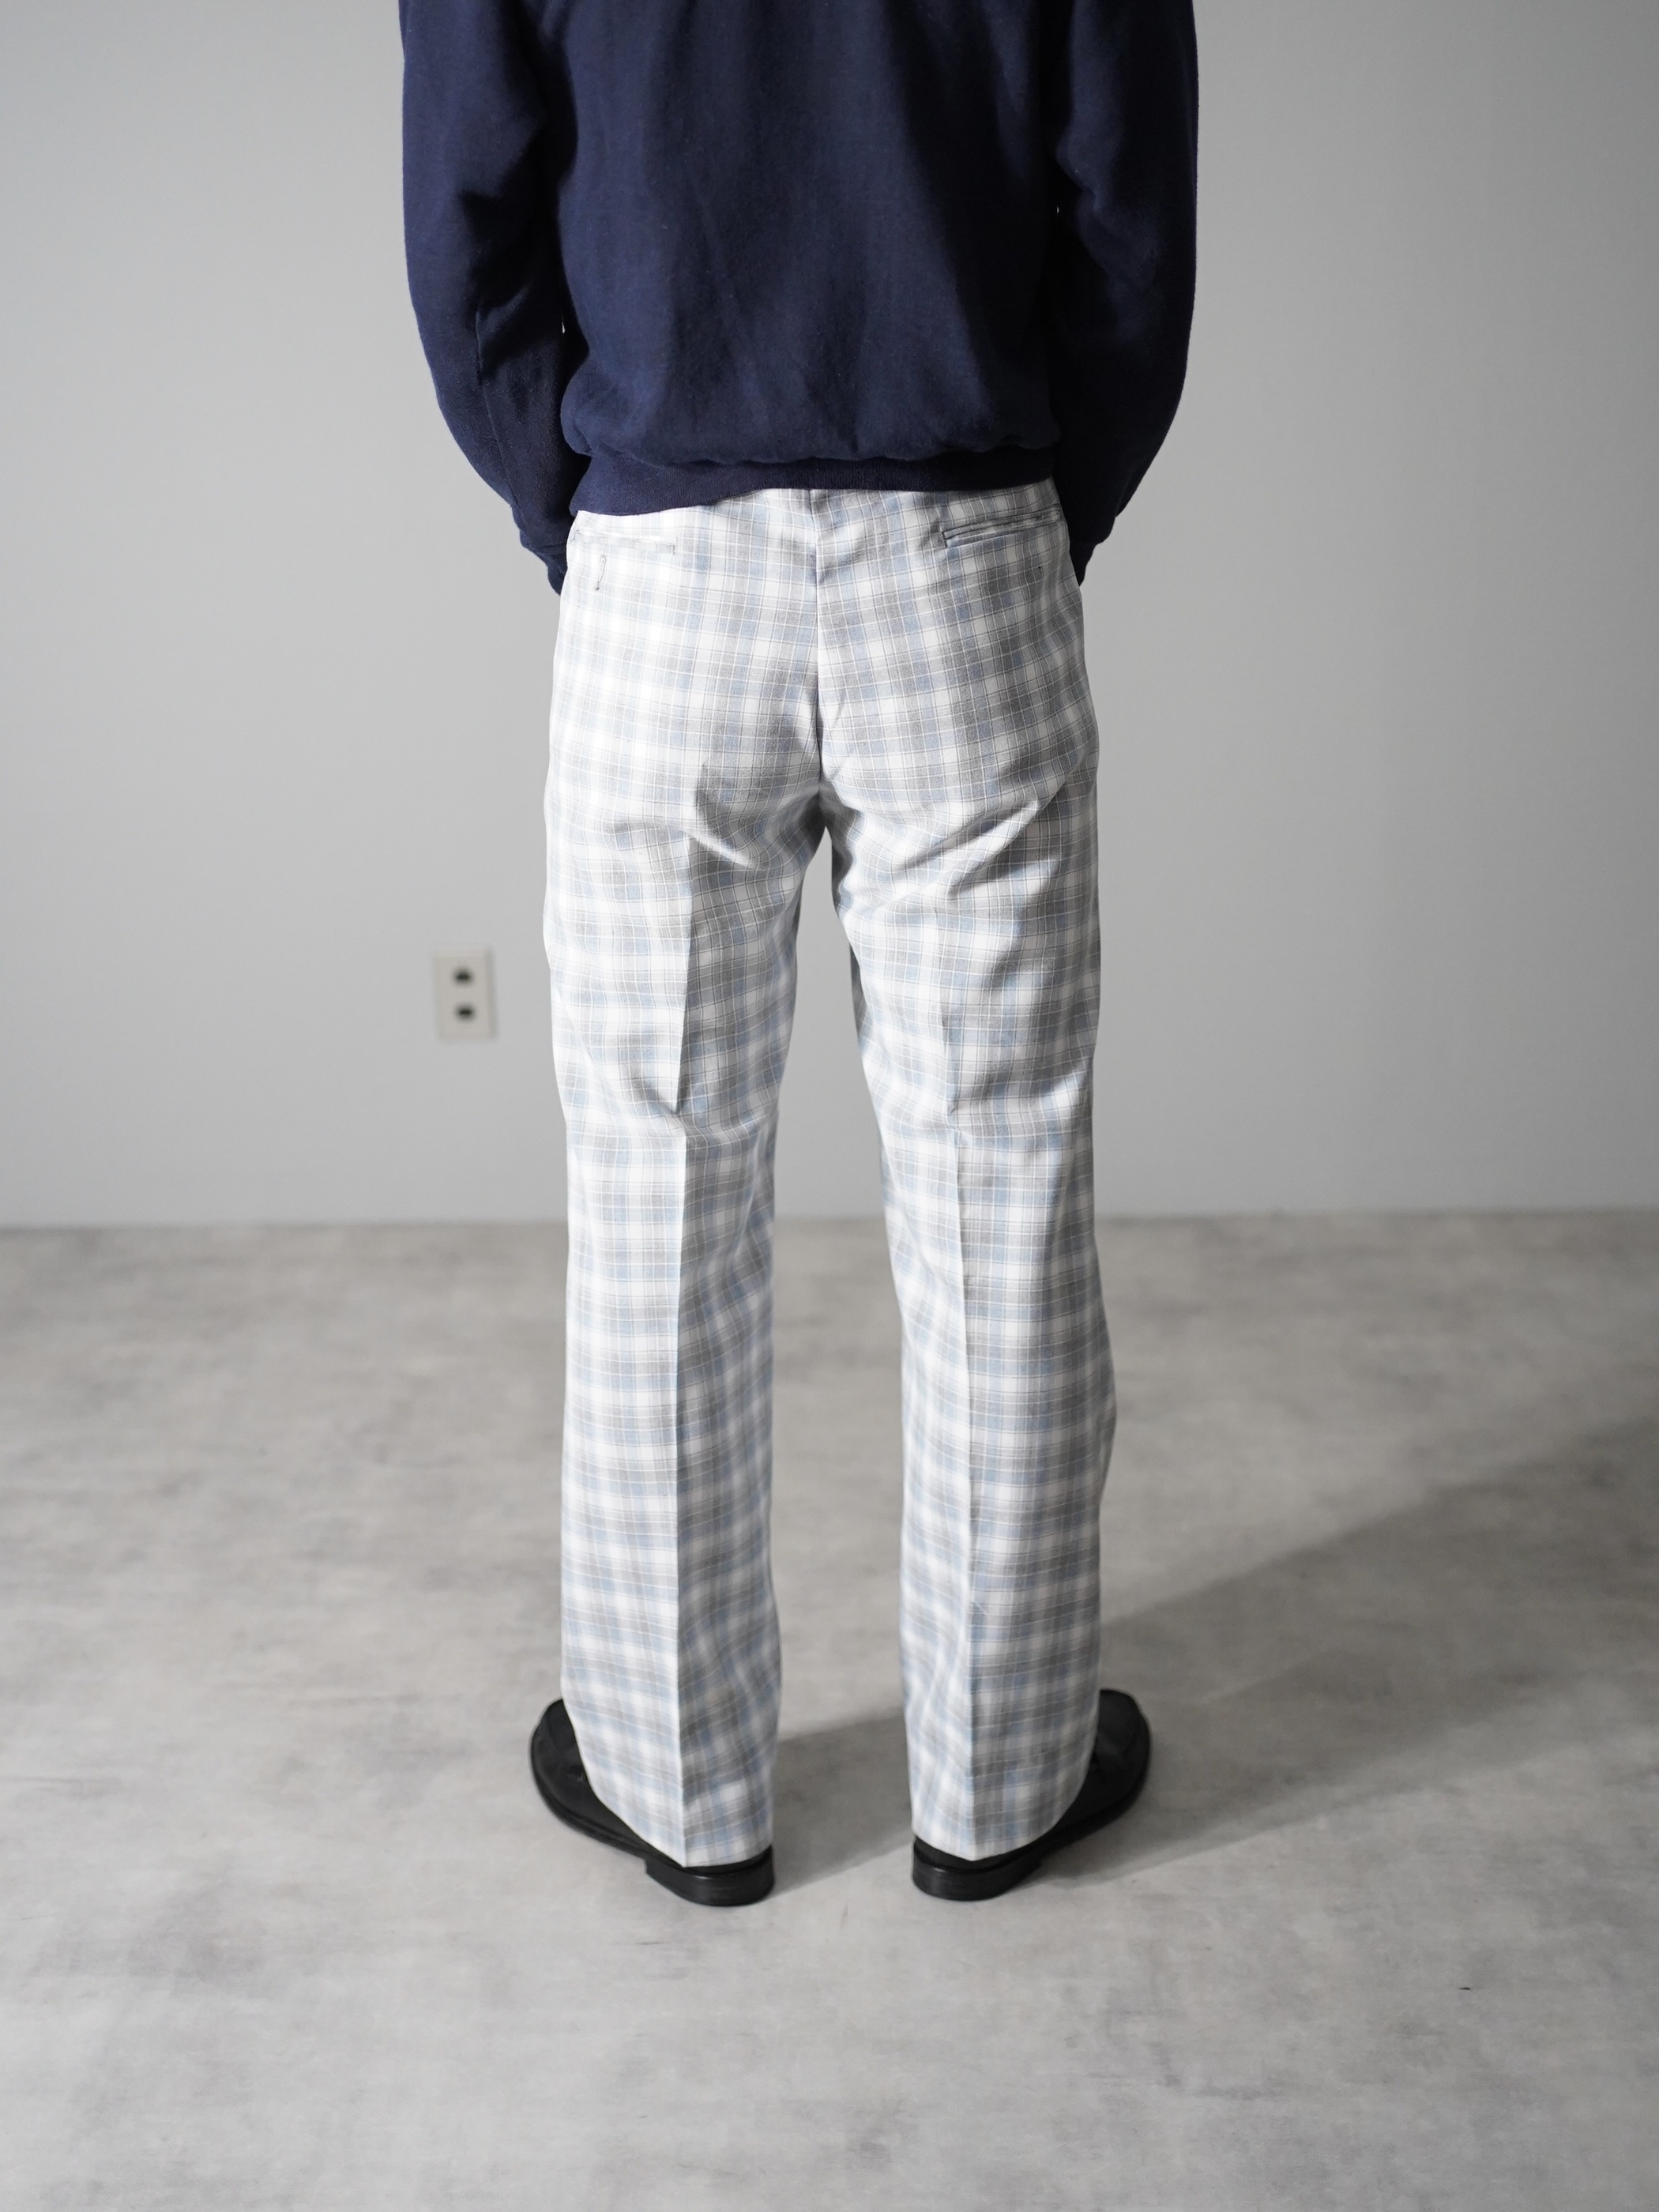 1970-80's Berle tailored Cotton poly check trousers